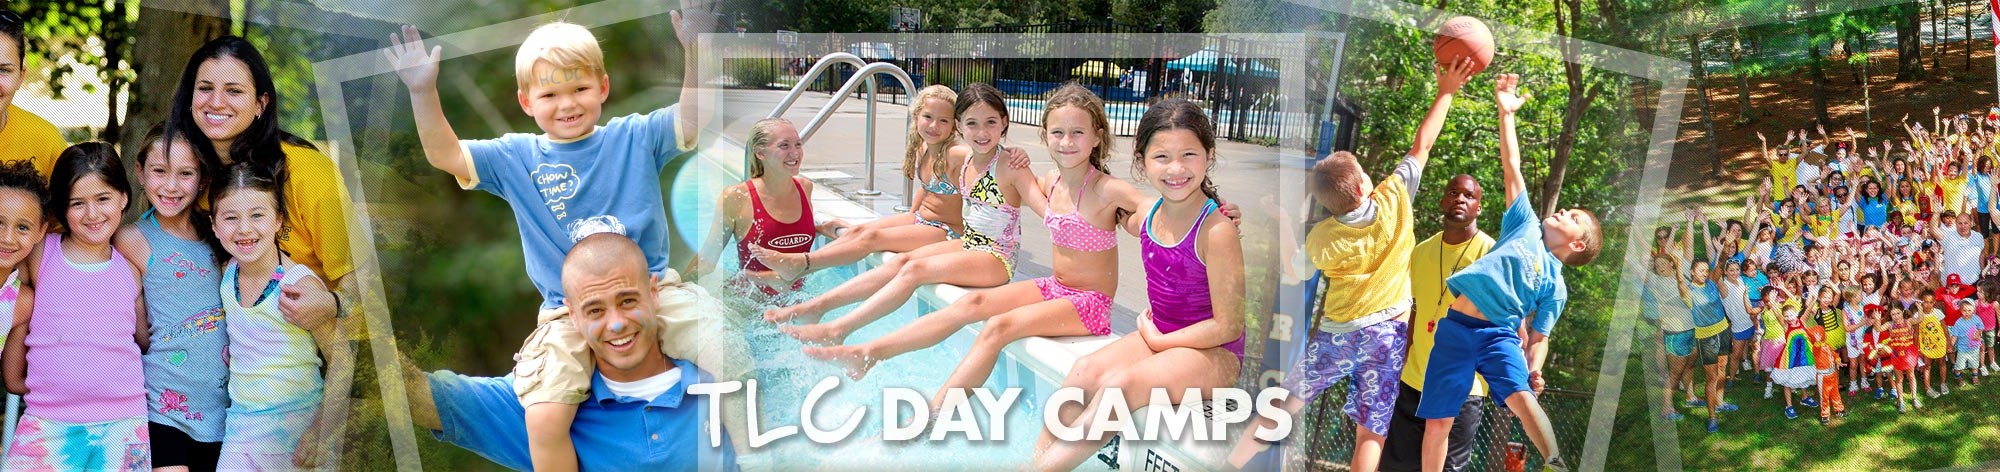 Jobs at summer day camps